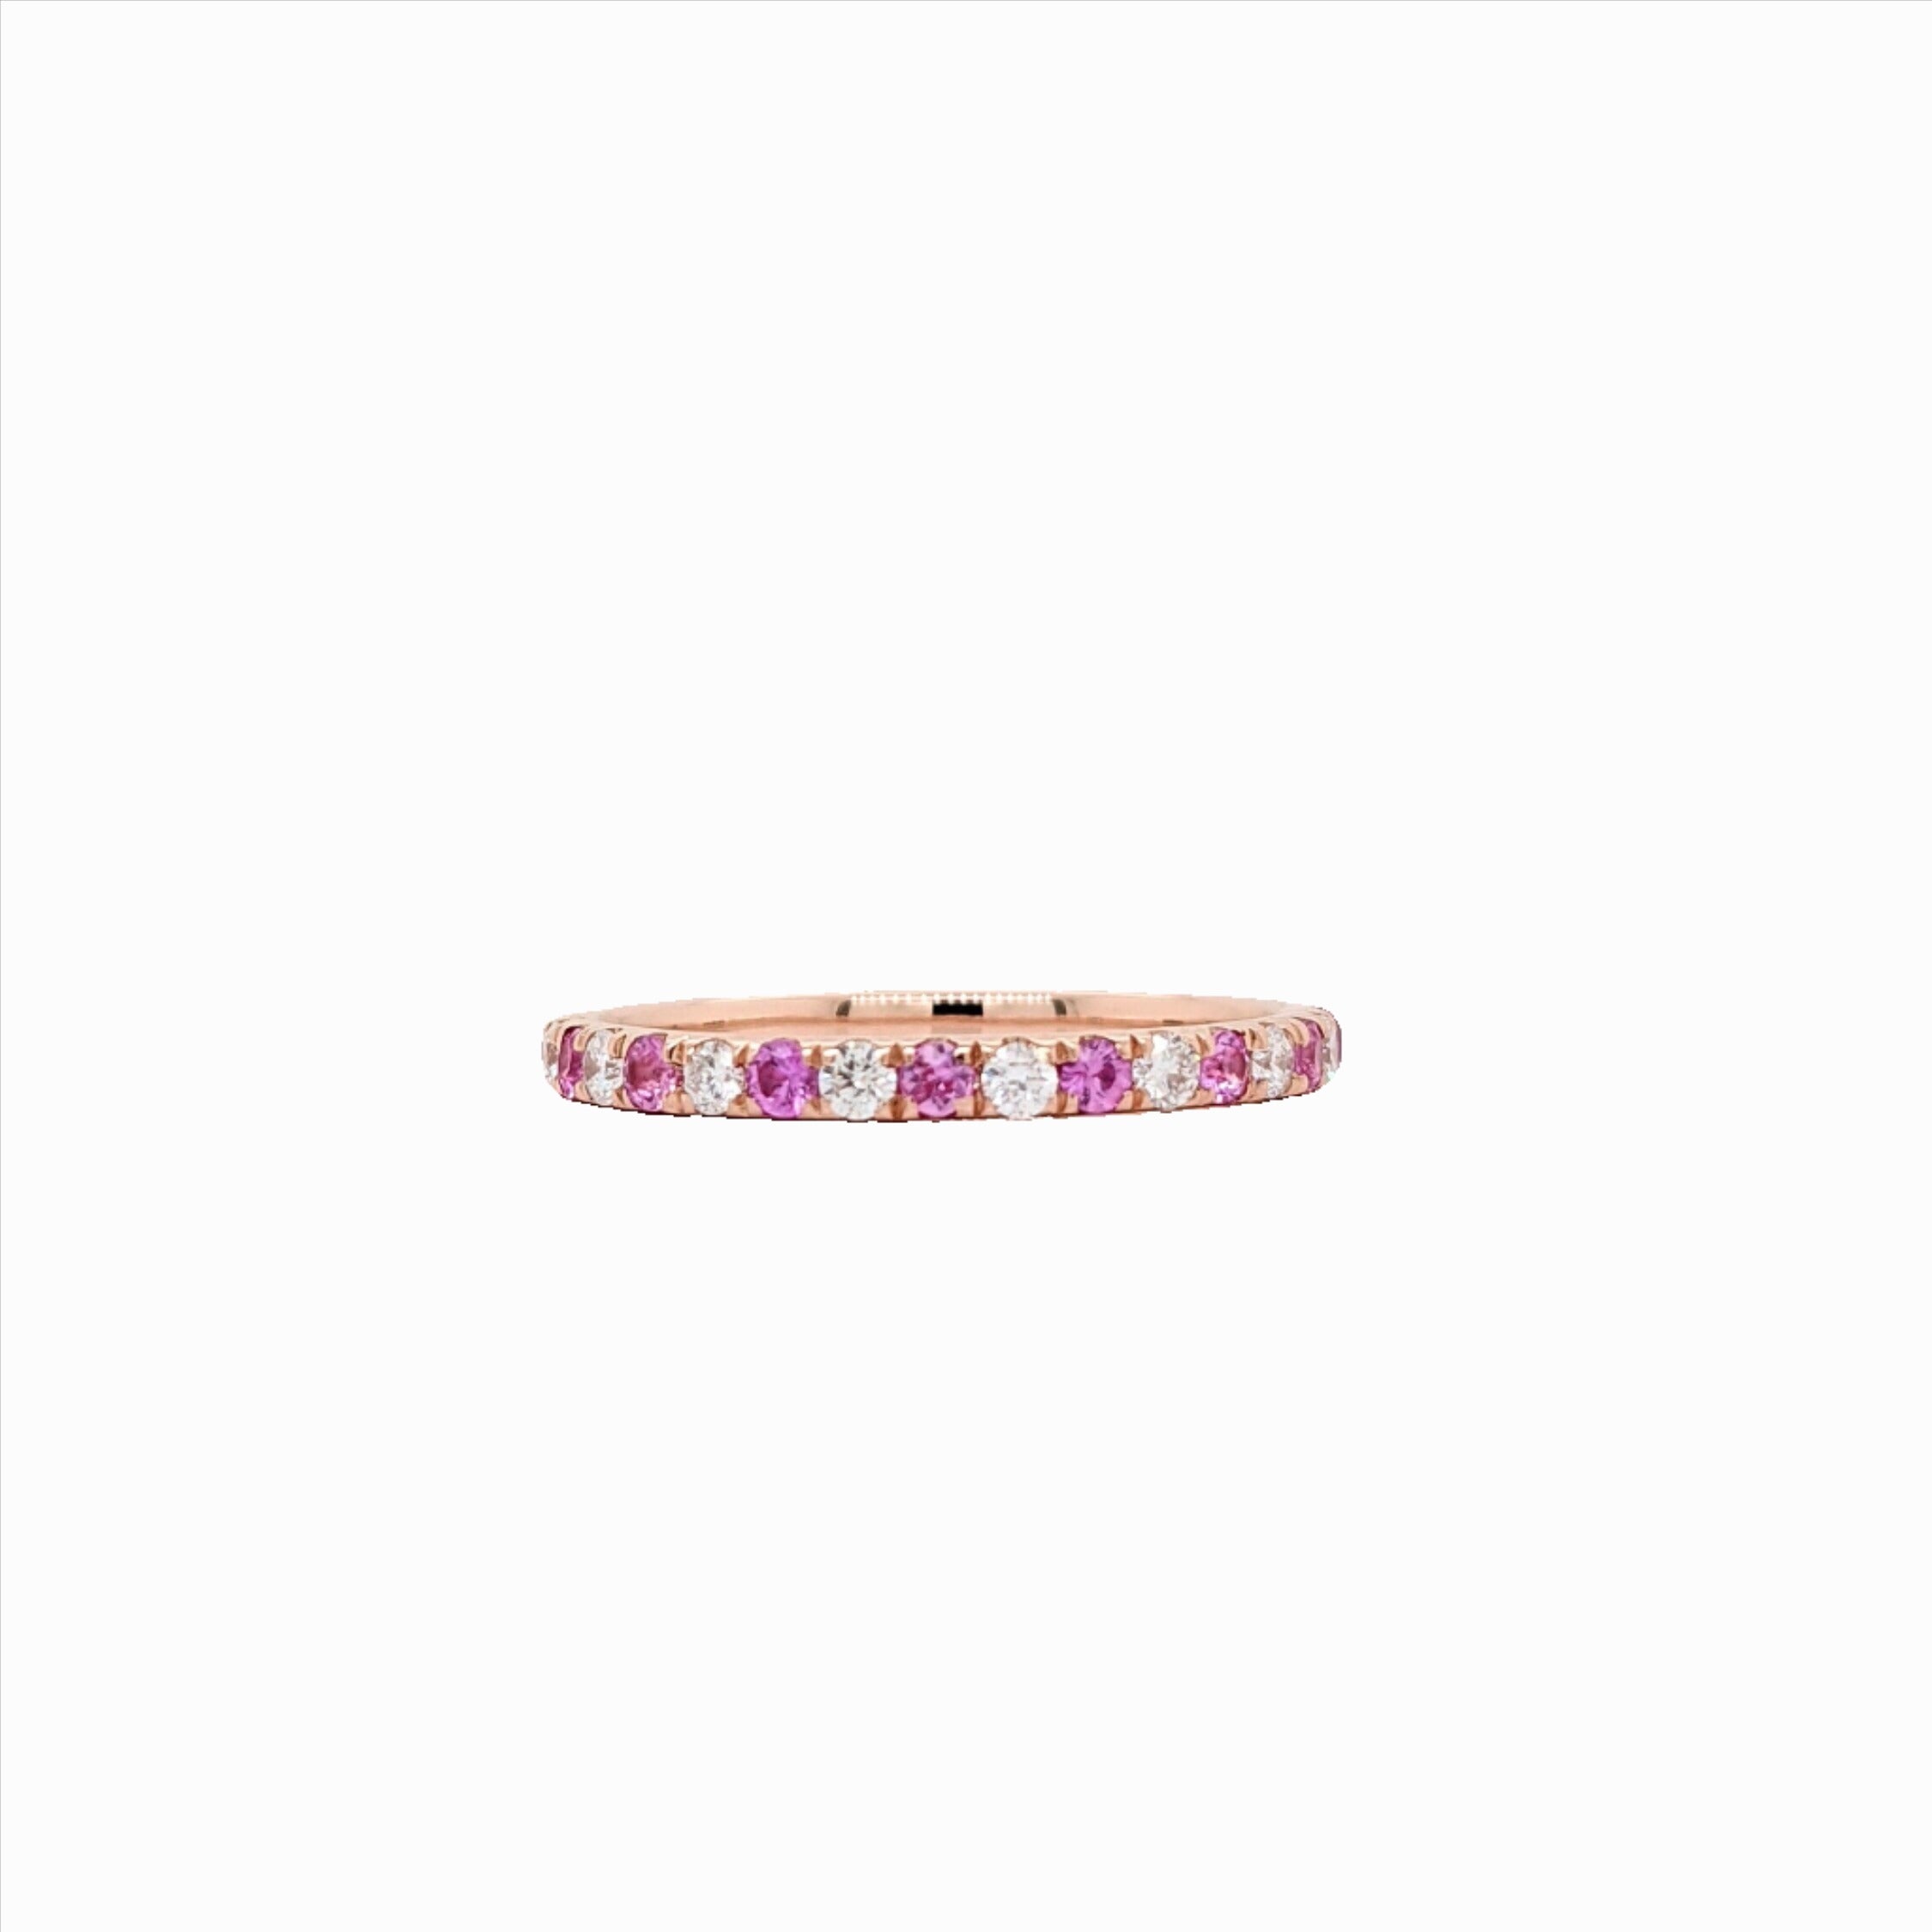 Beautiful Pink Sapphire Band in 14k Solid White, Rose and Yellow Gold with Natural Diamond Accents | September Birthstone | Minimalist